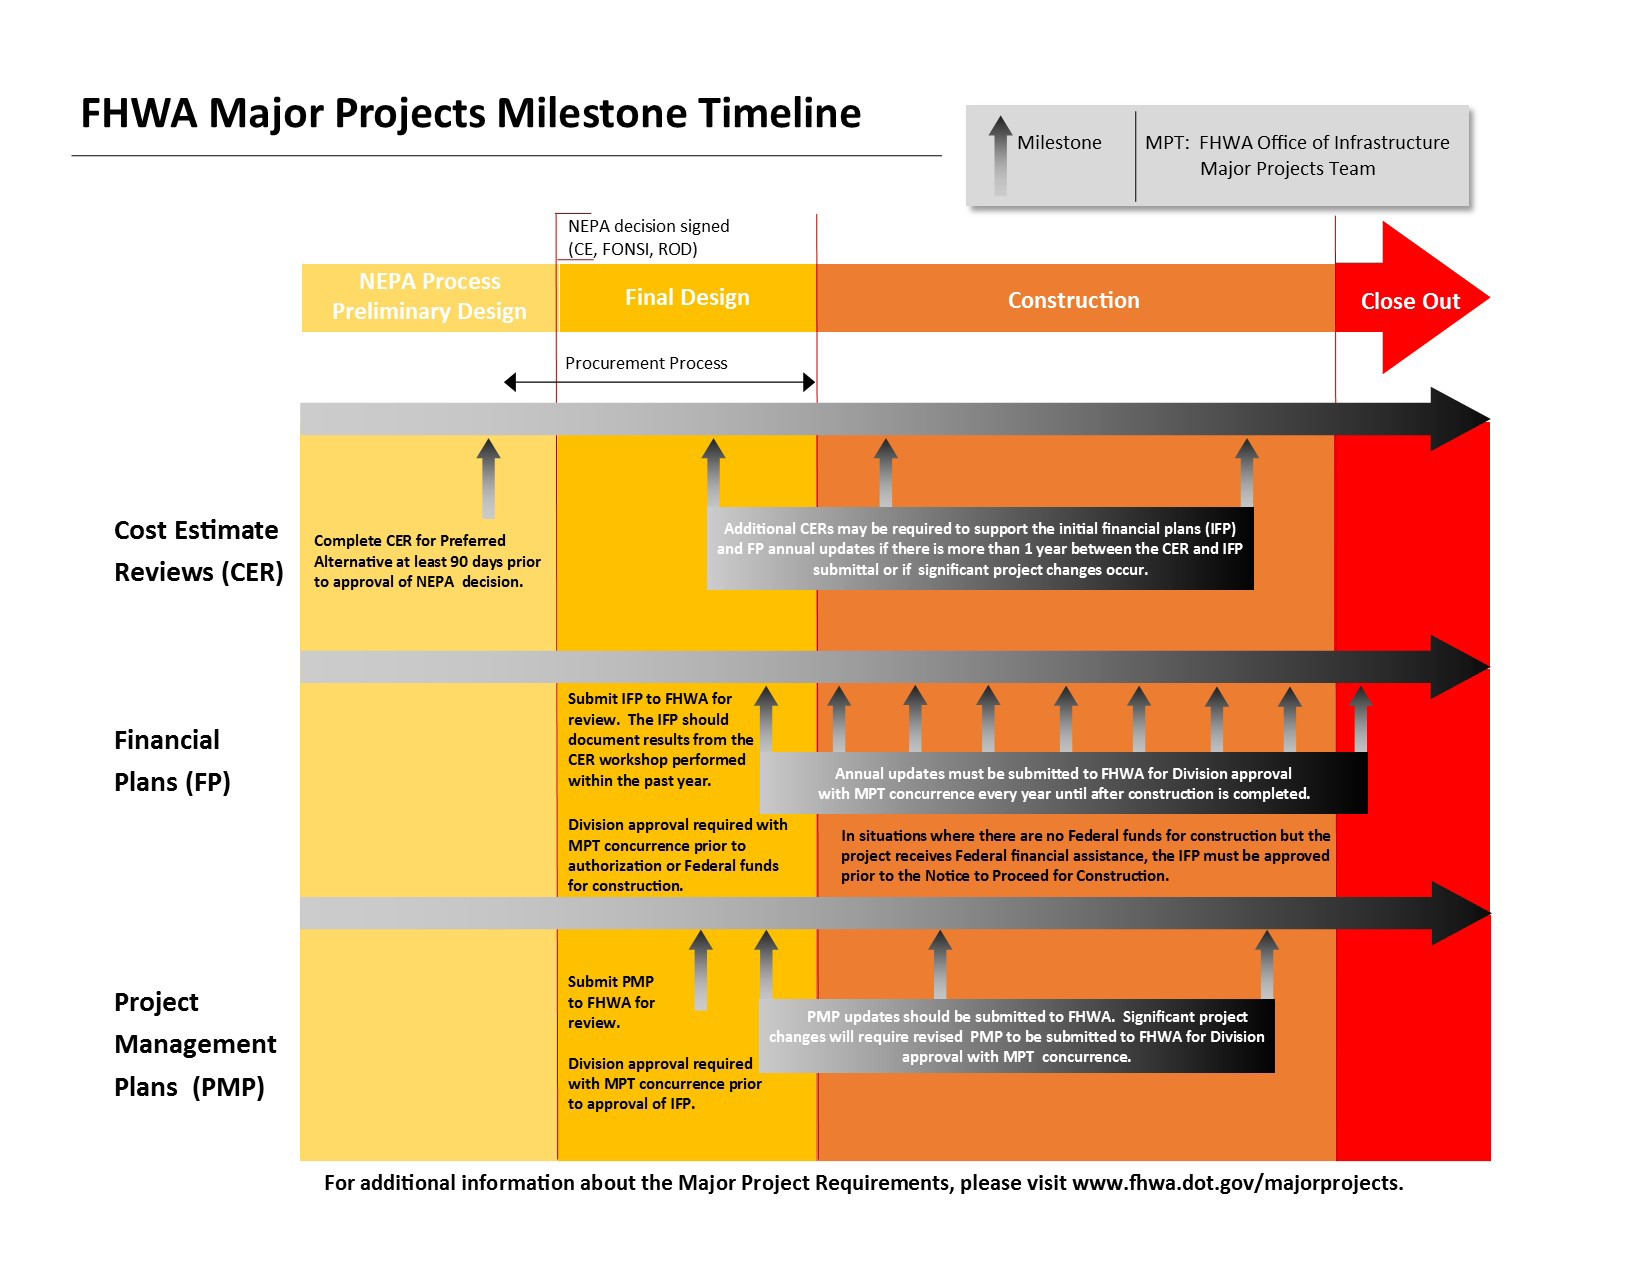 Major Projects Timleline as discussed below